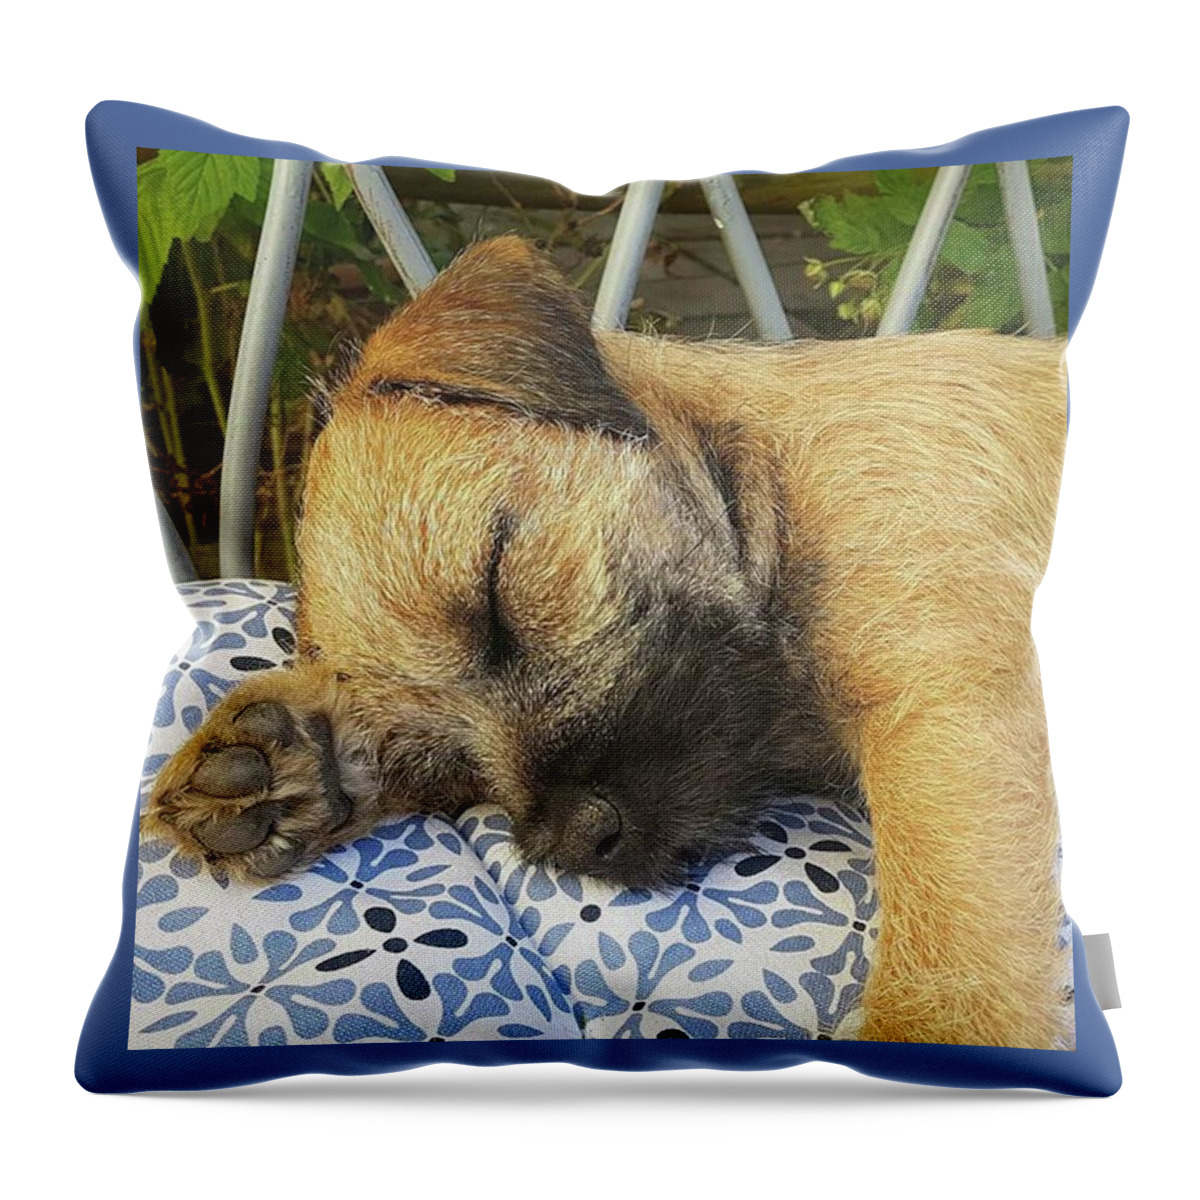 Dog Throw Pillow featuring the photograph Puppy Nap by Rowena Tutty